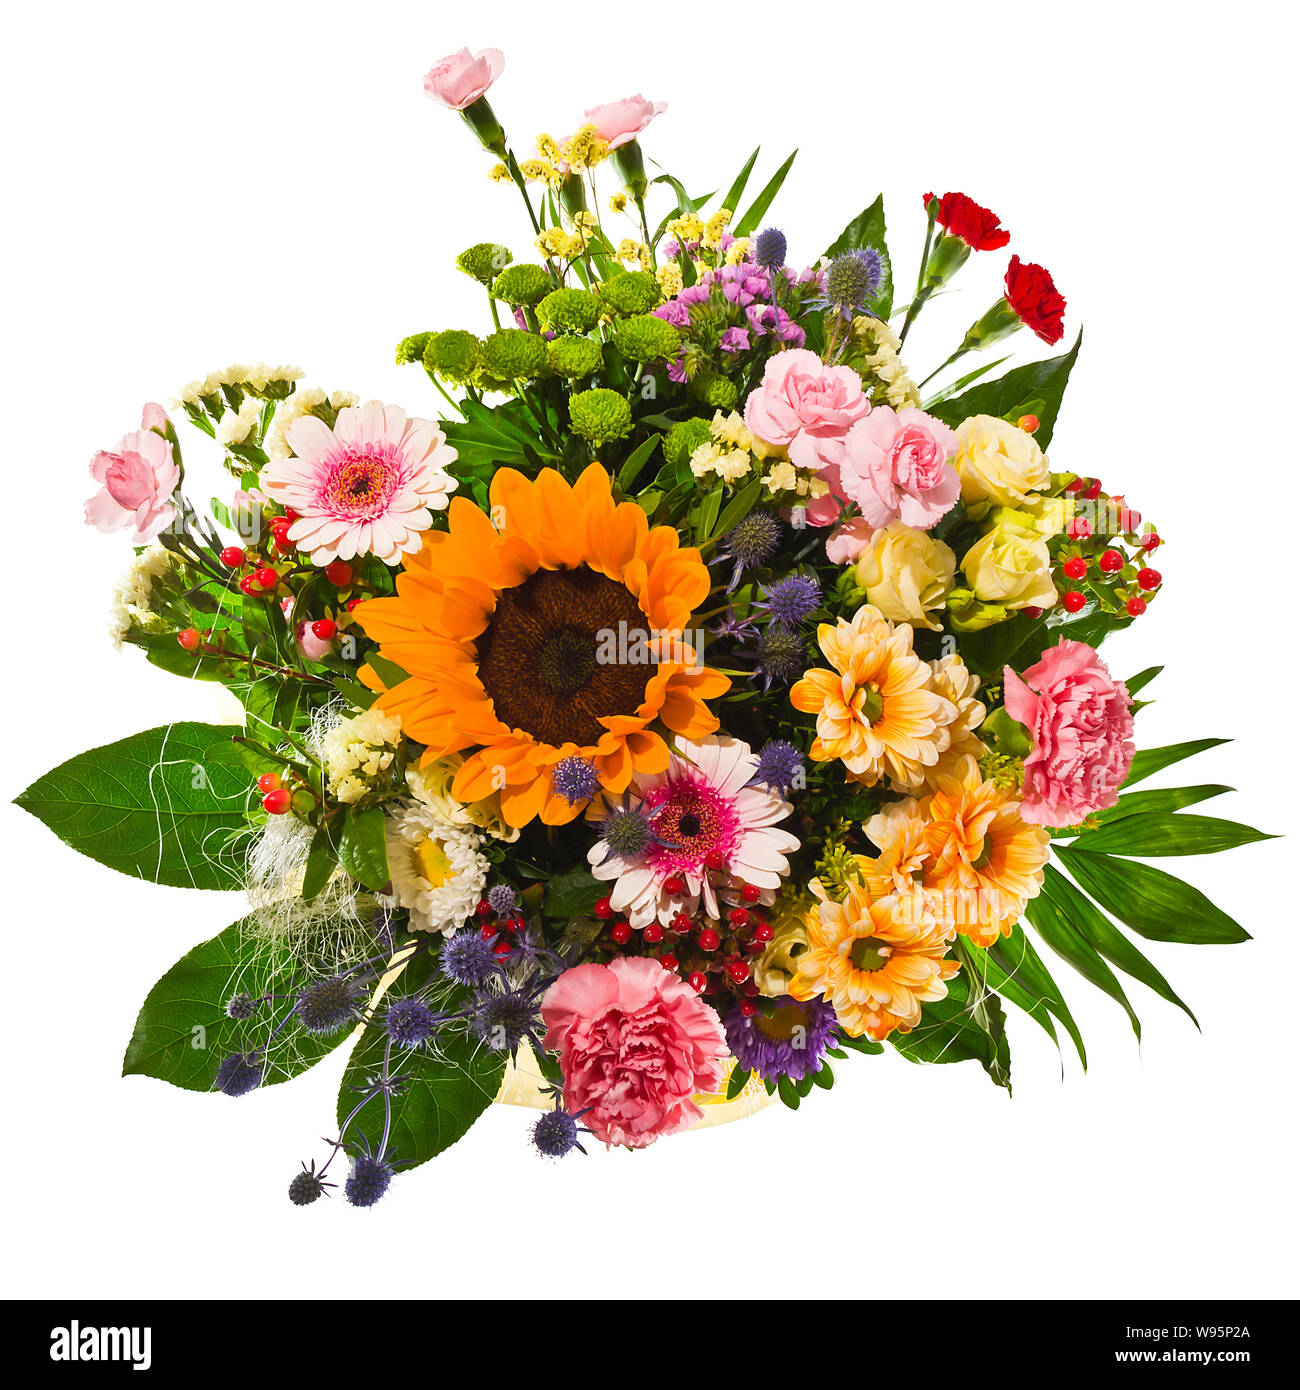 Bouquet of colorful  fresh flowers Stock Photo